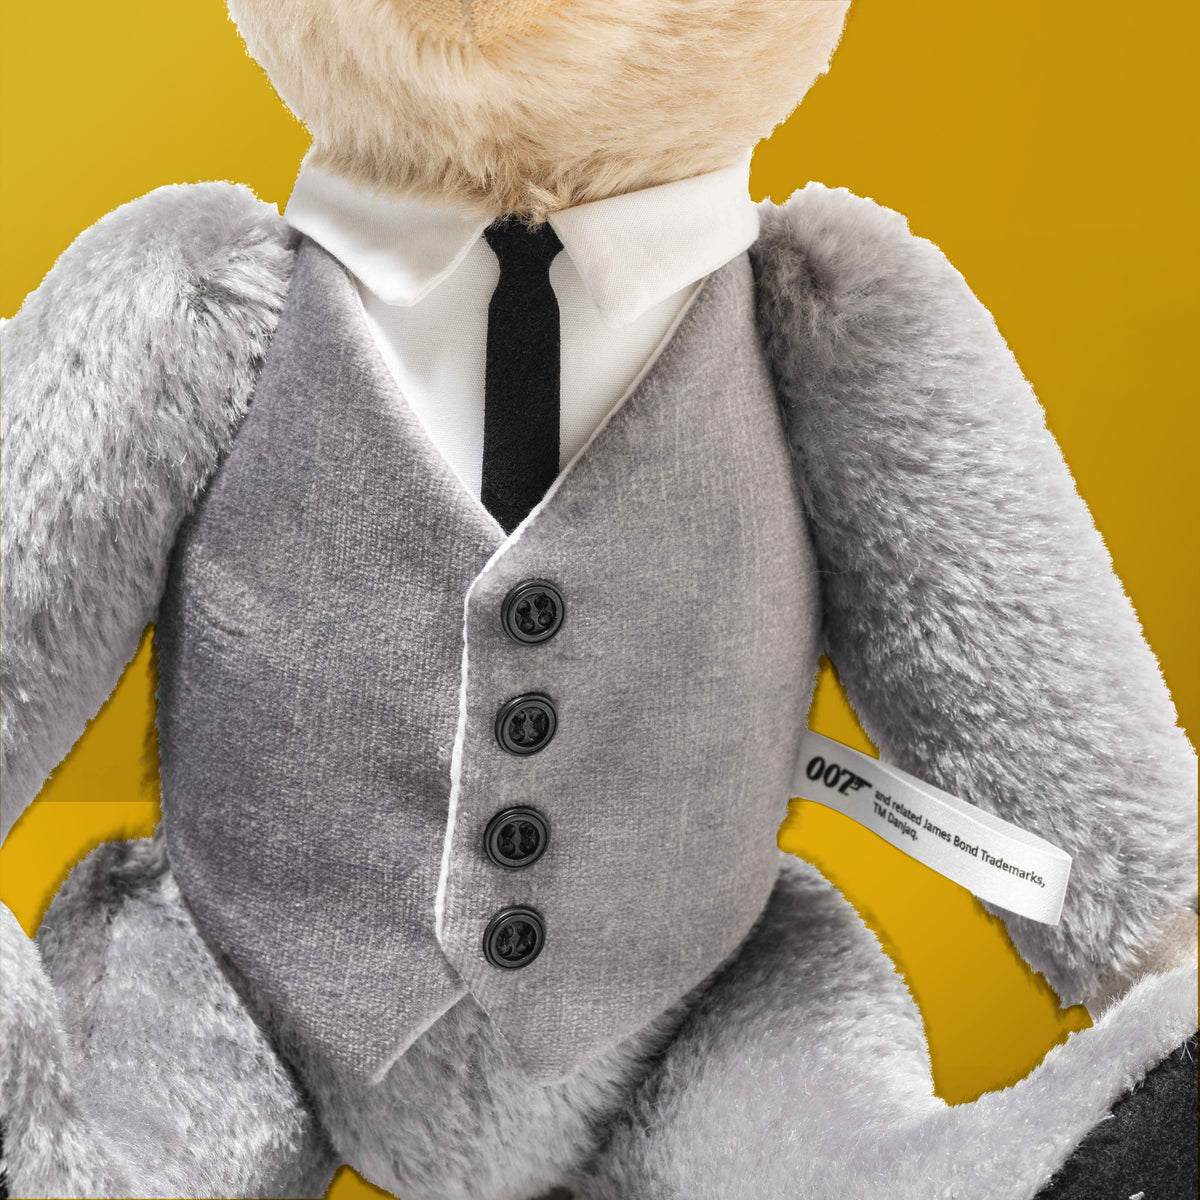 James Bond Musical Teddy Bear - Goldfinger Numbered Edition - By Steiff